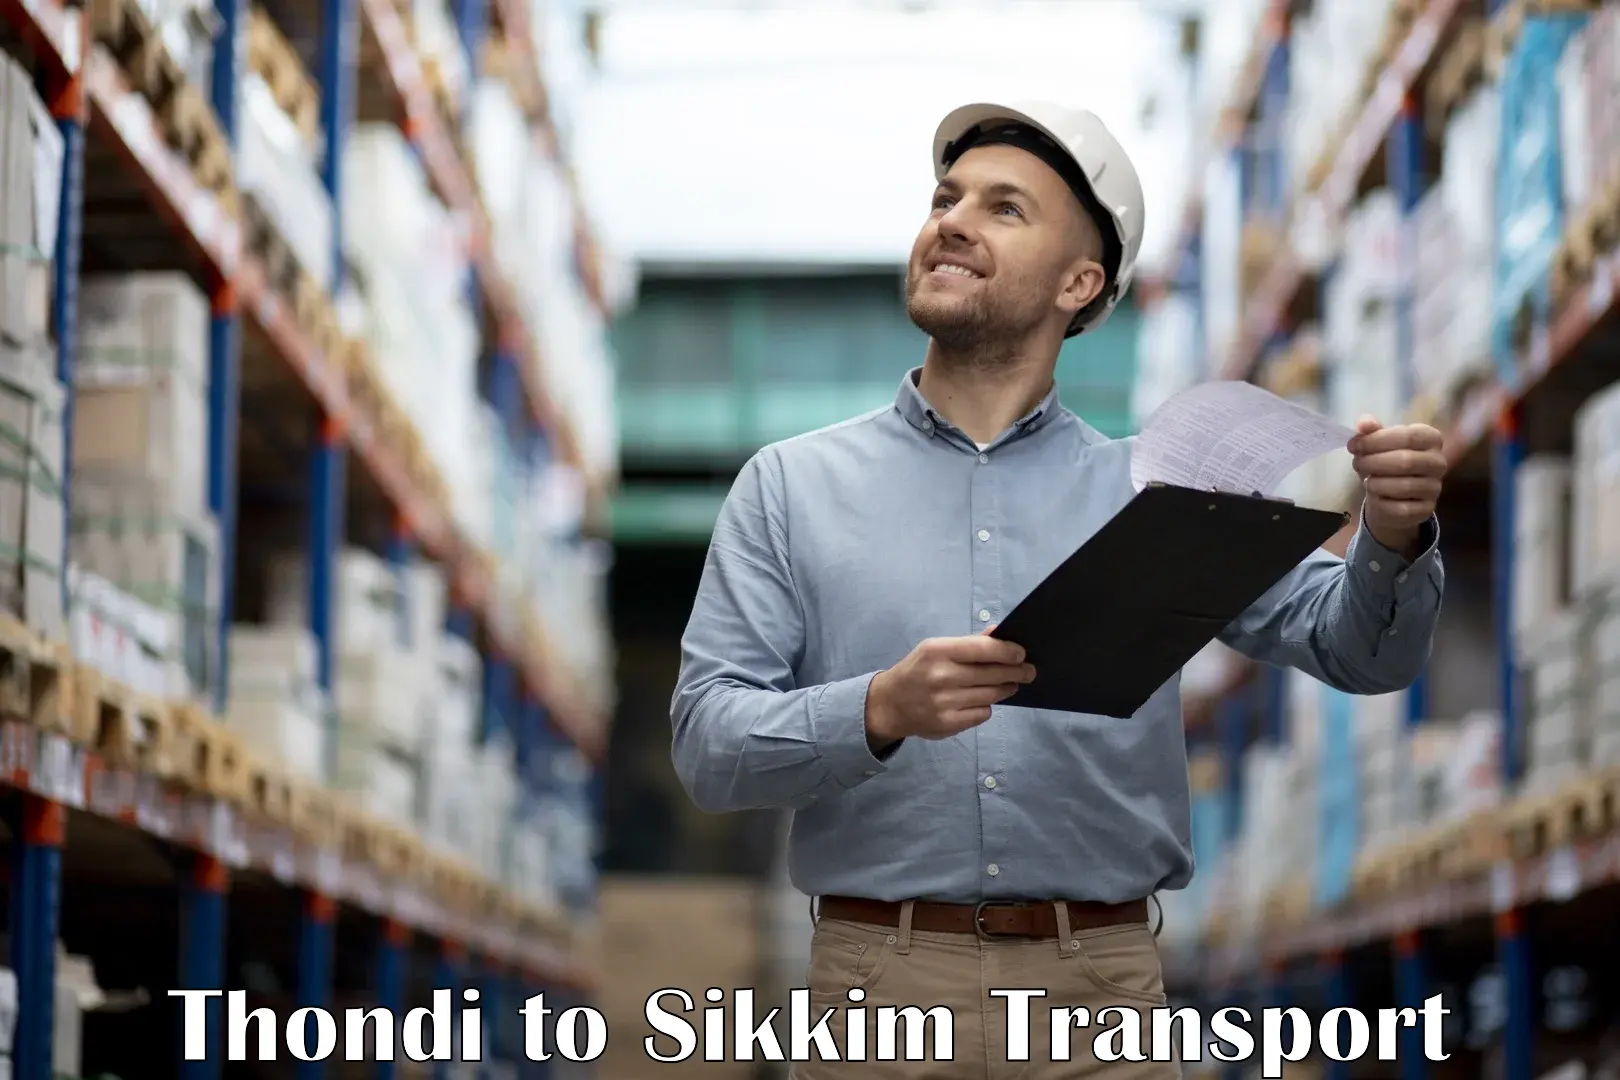 Online transport service Thondi to South Sikkim